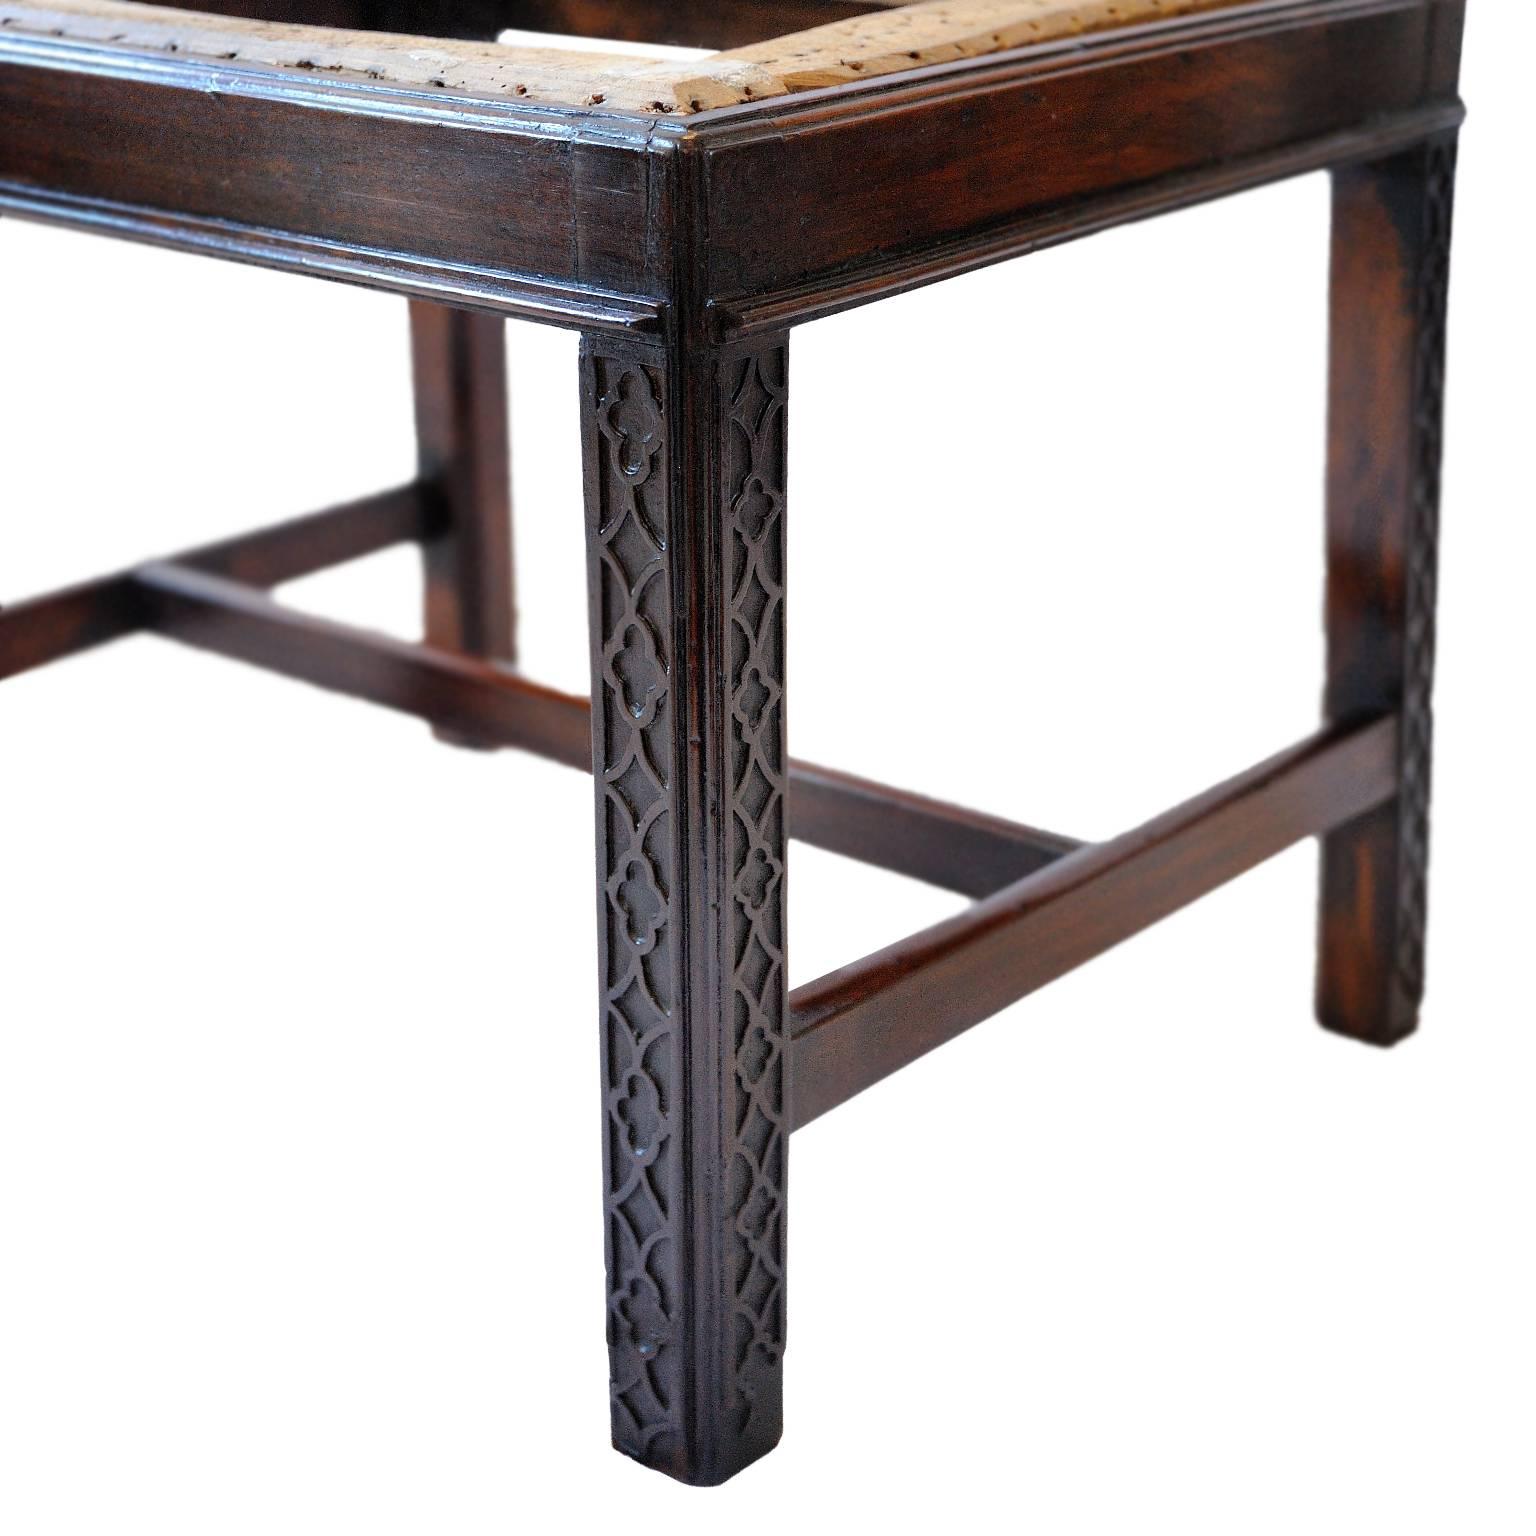 Carved English Mid-18th Century George III Mahogany Chippendale Style Stool, circa 1760 For Sale